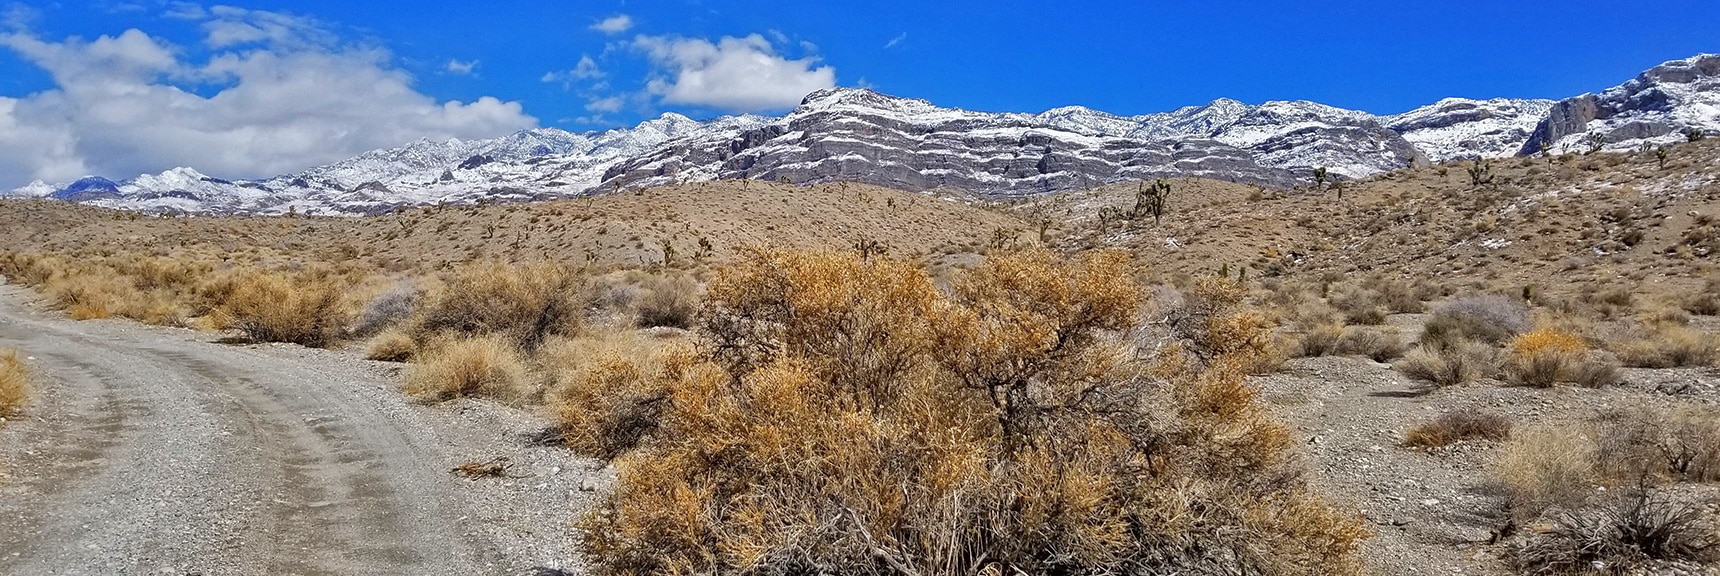 View of Northern Sheep Range from Cow Camp Road | Cow Camp Road | Sheep Range | Desert National Wildlife Refuge, Nevada